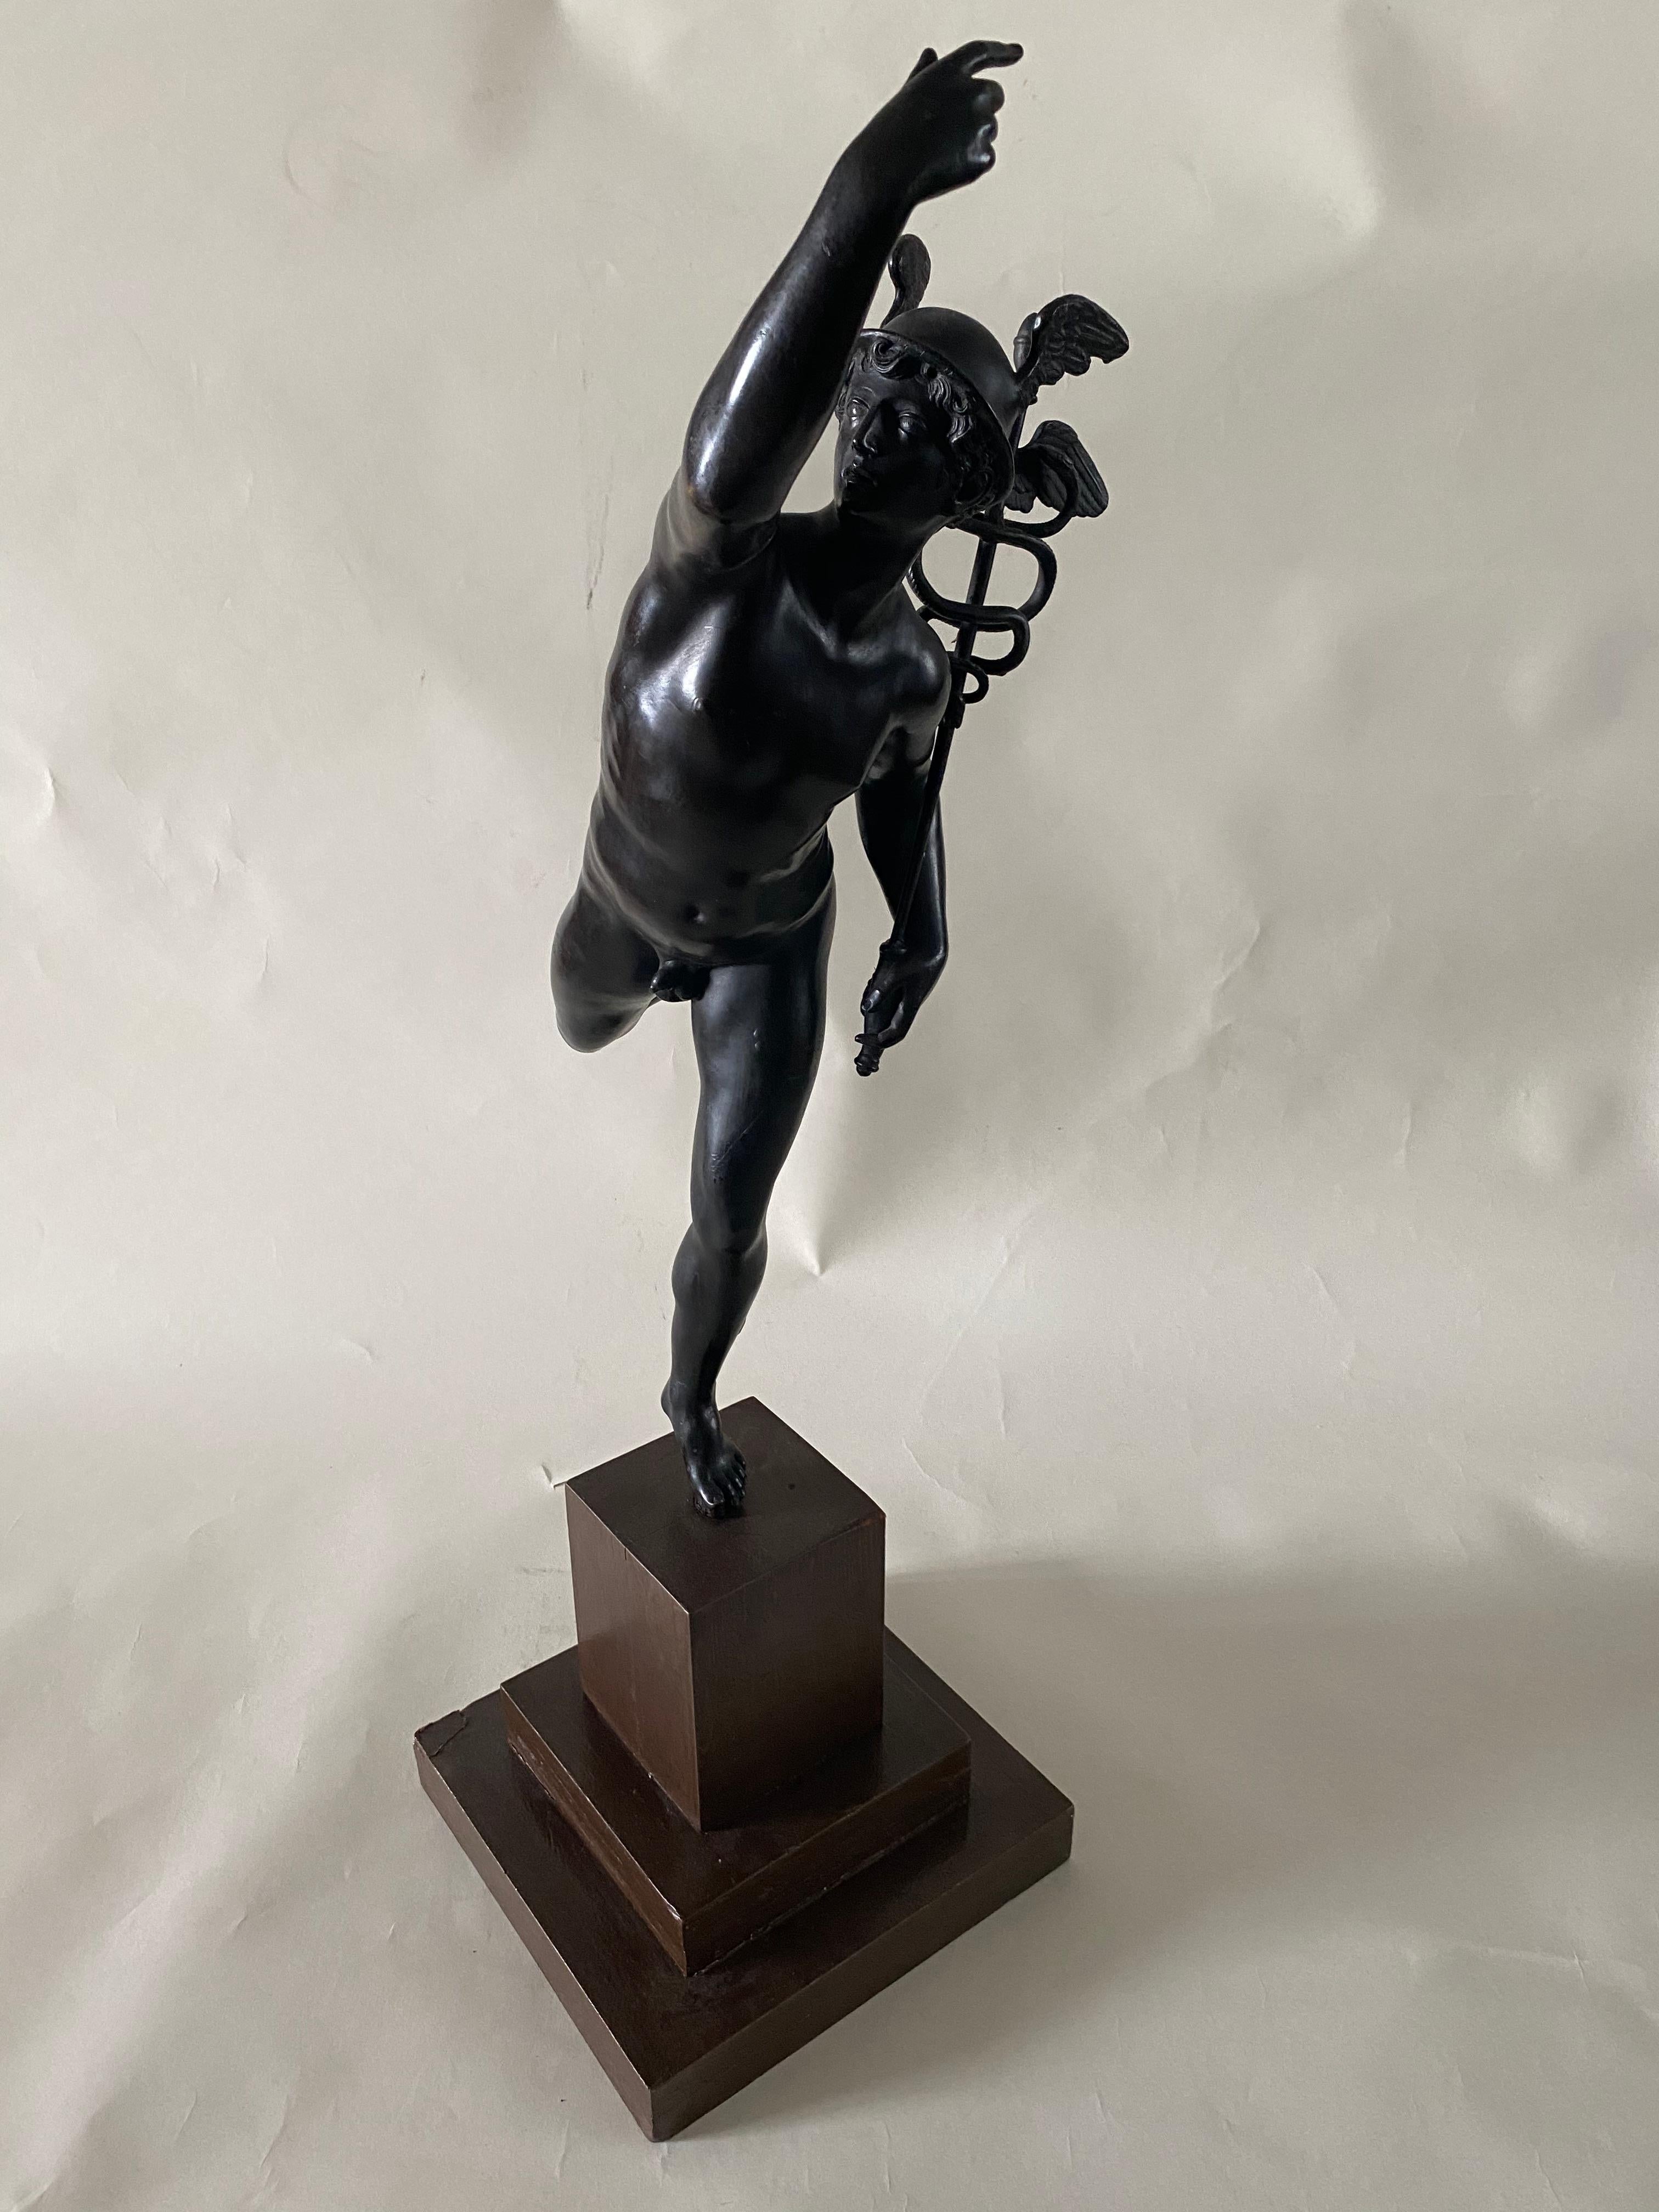 This handsome and large solid-cast sculpture Mercury in flight is a copy of the most famous creation of Giambologna, the Flemish sculptor who worked for the Medici family in Florence, Italy where the original from 1580 is kept in the Bargello